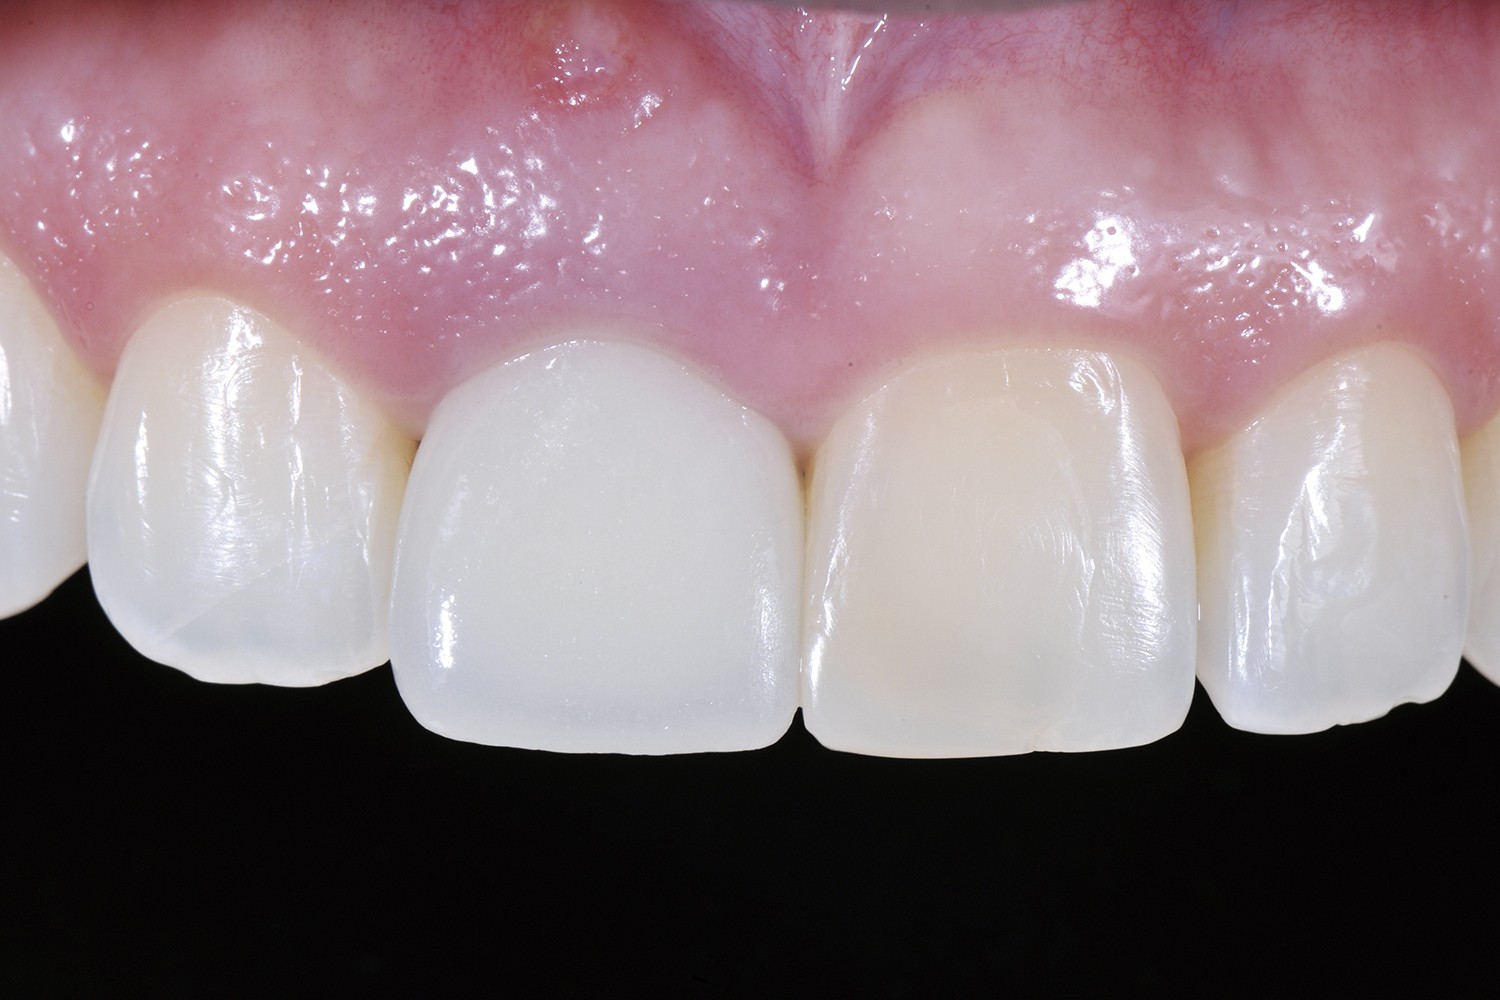 The aesthetic challenge of implant- and tooth-supported anterior rehabilitations